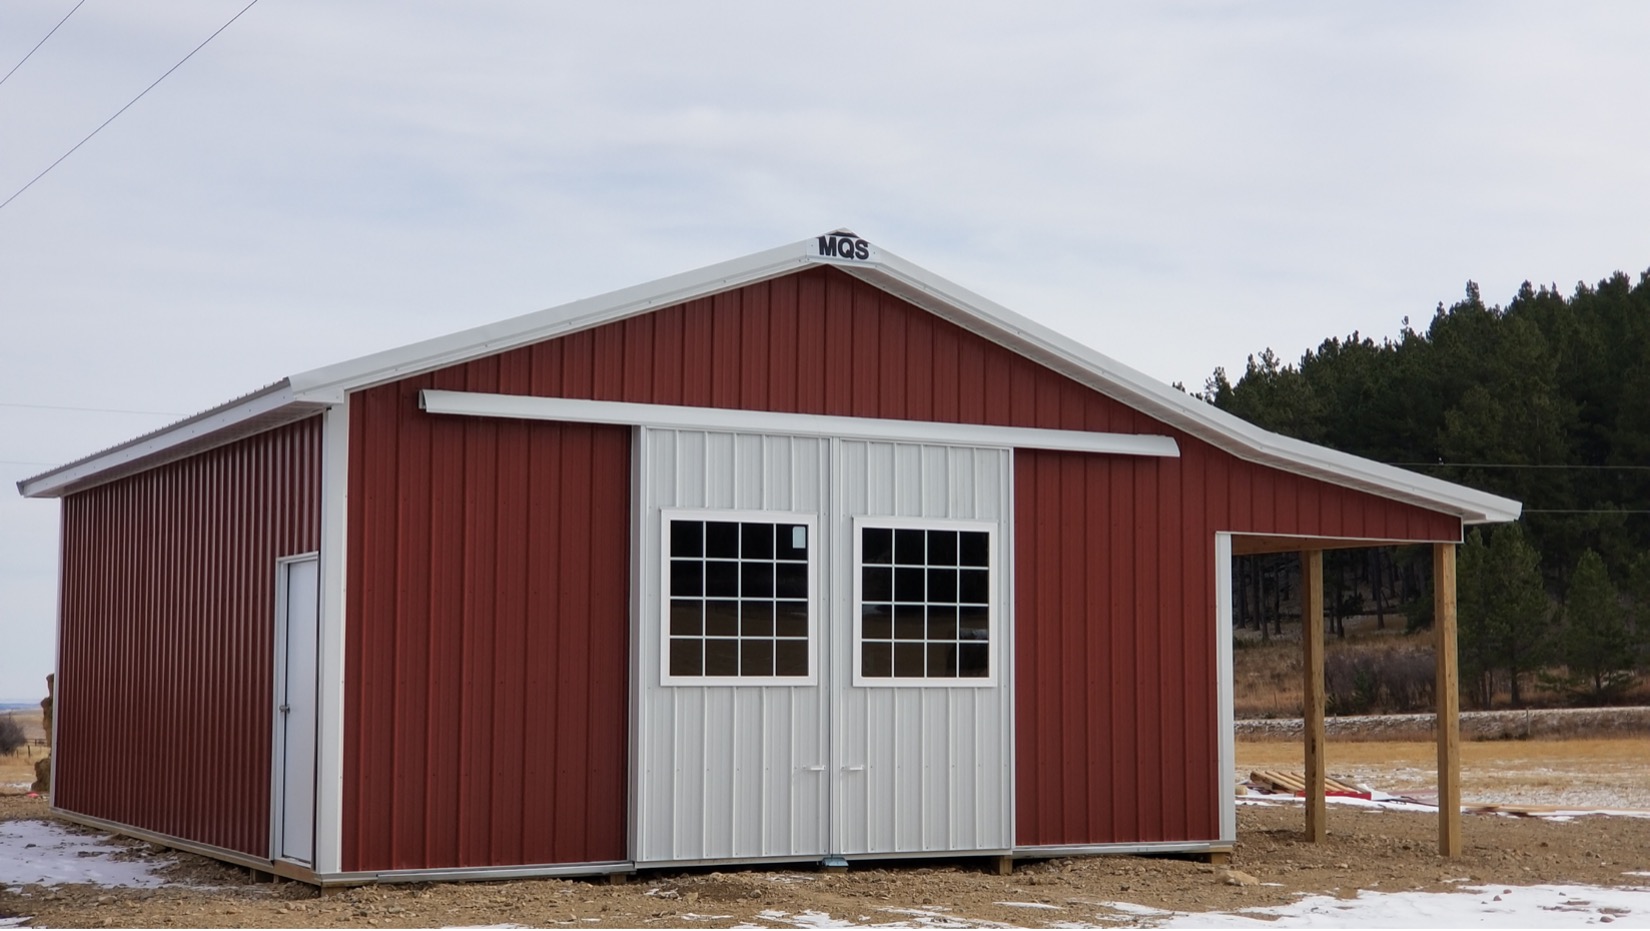 16 Post Frame Metal Buildings in Spokane That Can Solve Your Space Problems